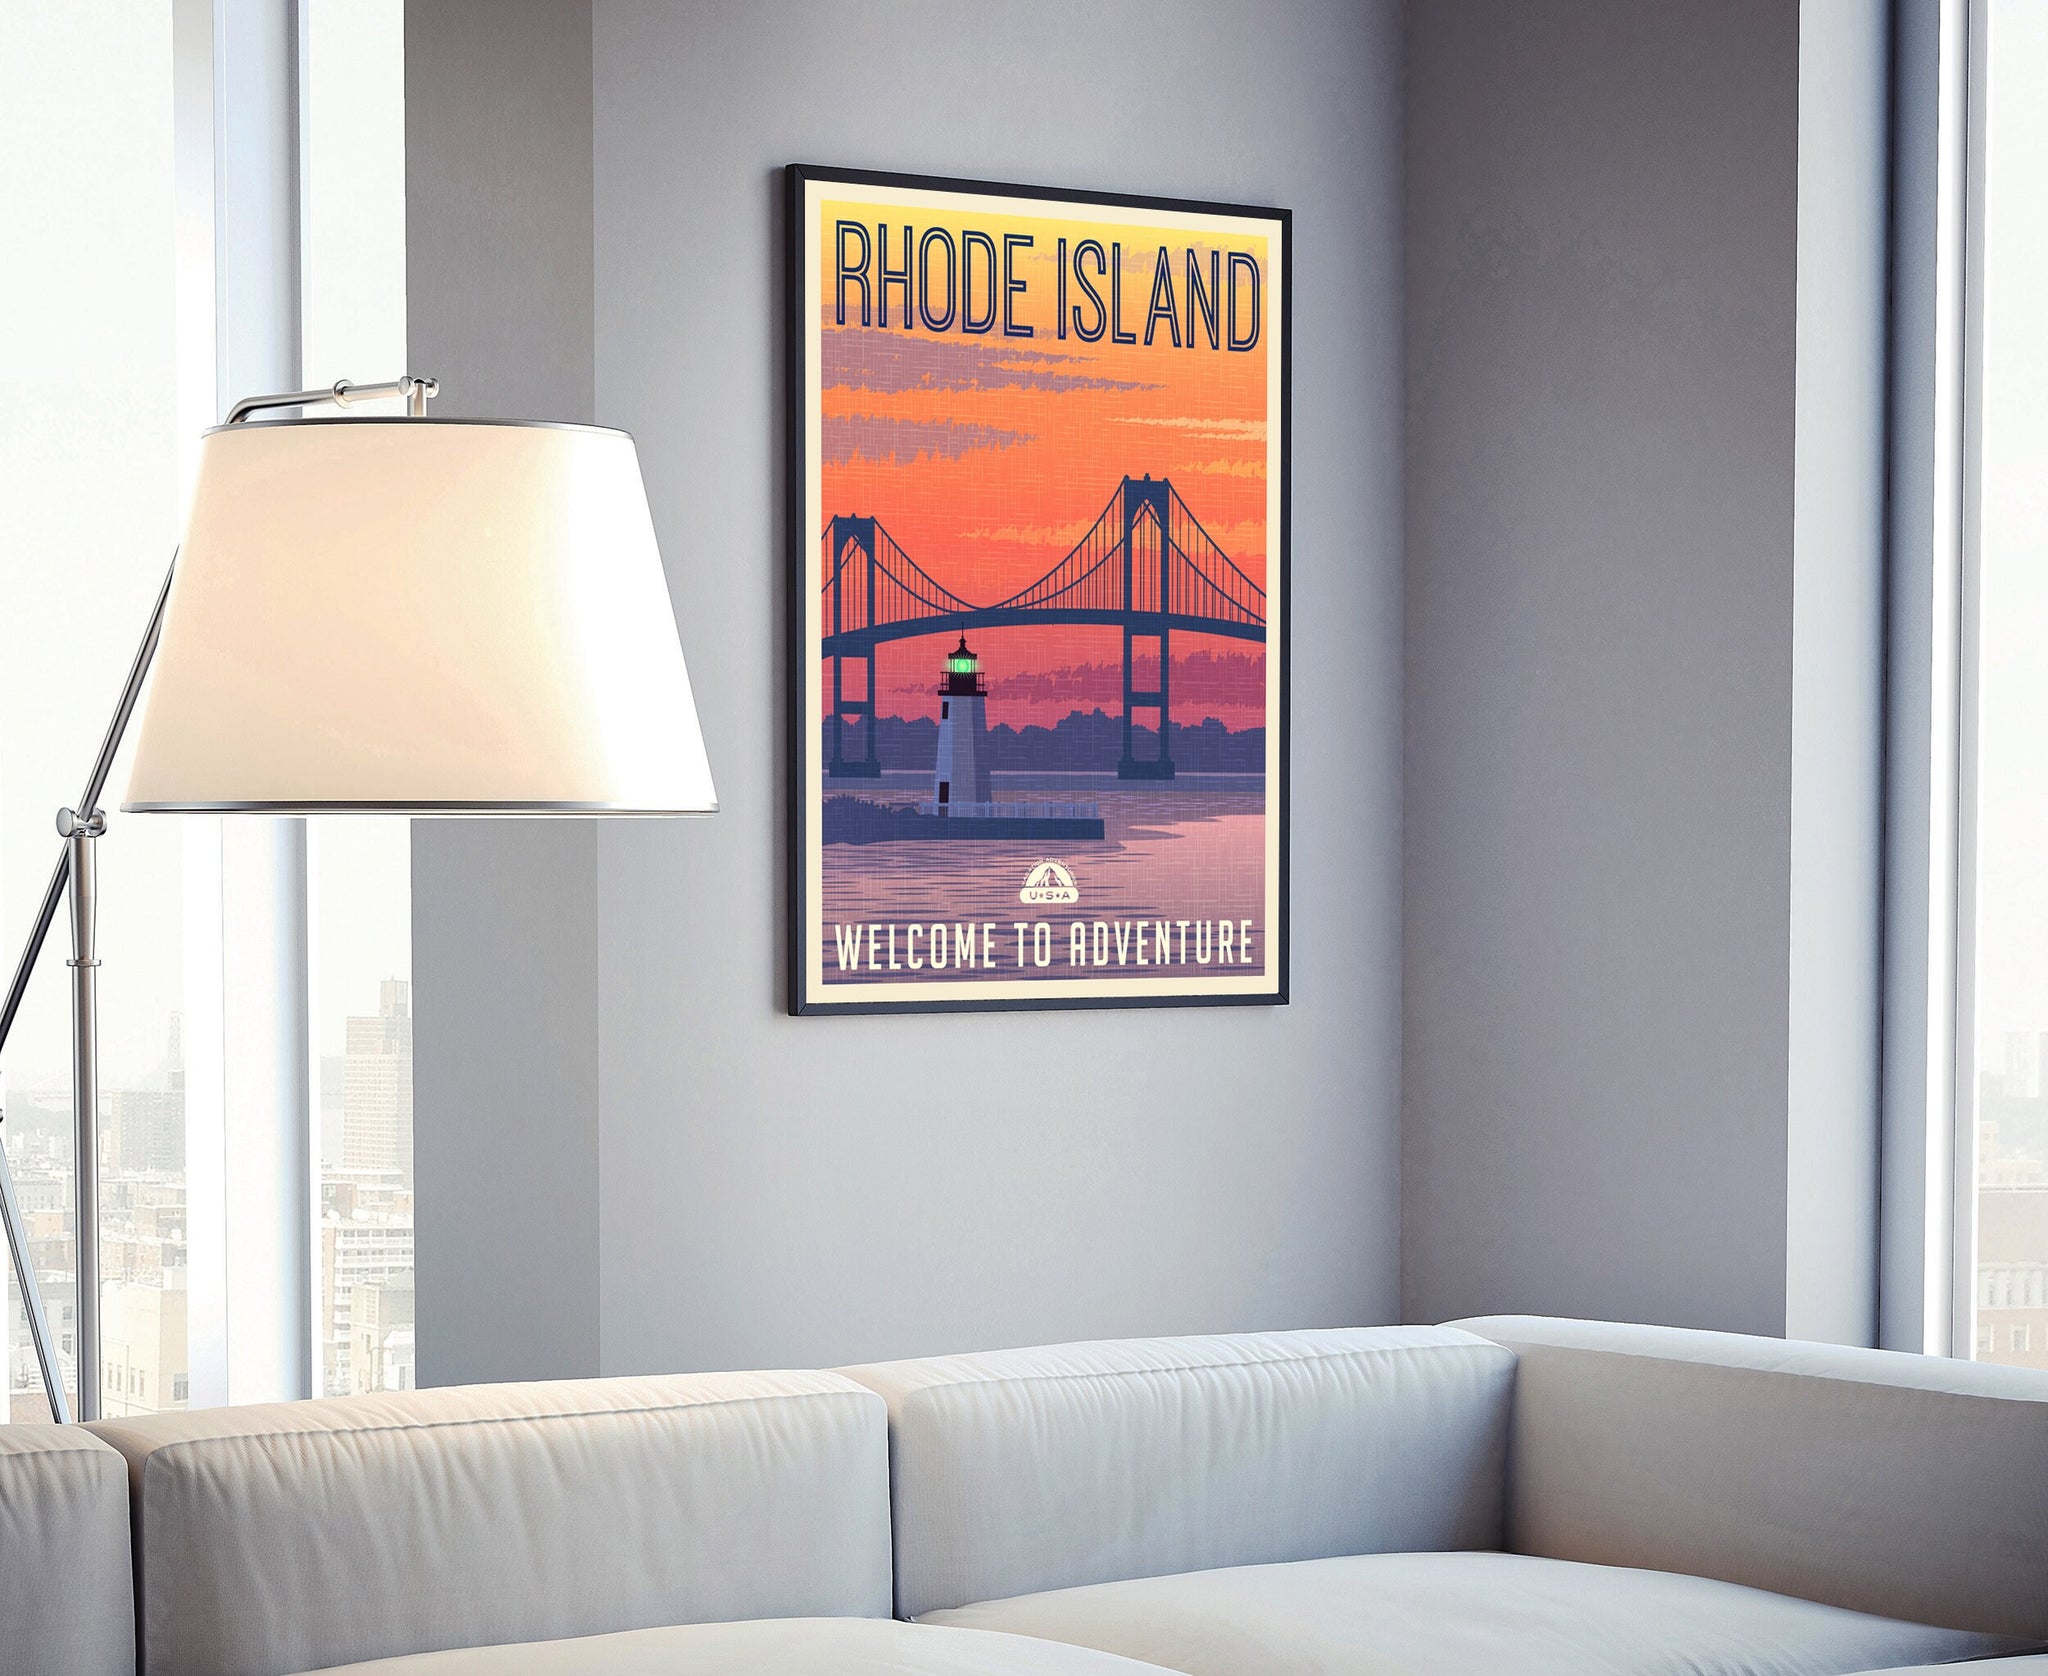 Rhode Island Vintage Rustic Poster Print, Retro Style Travel Poster